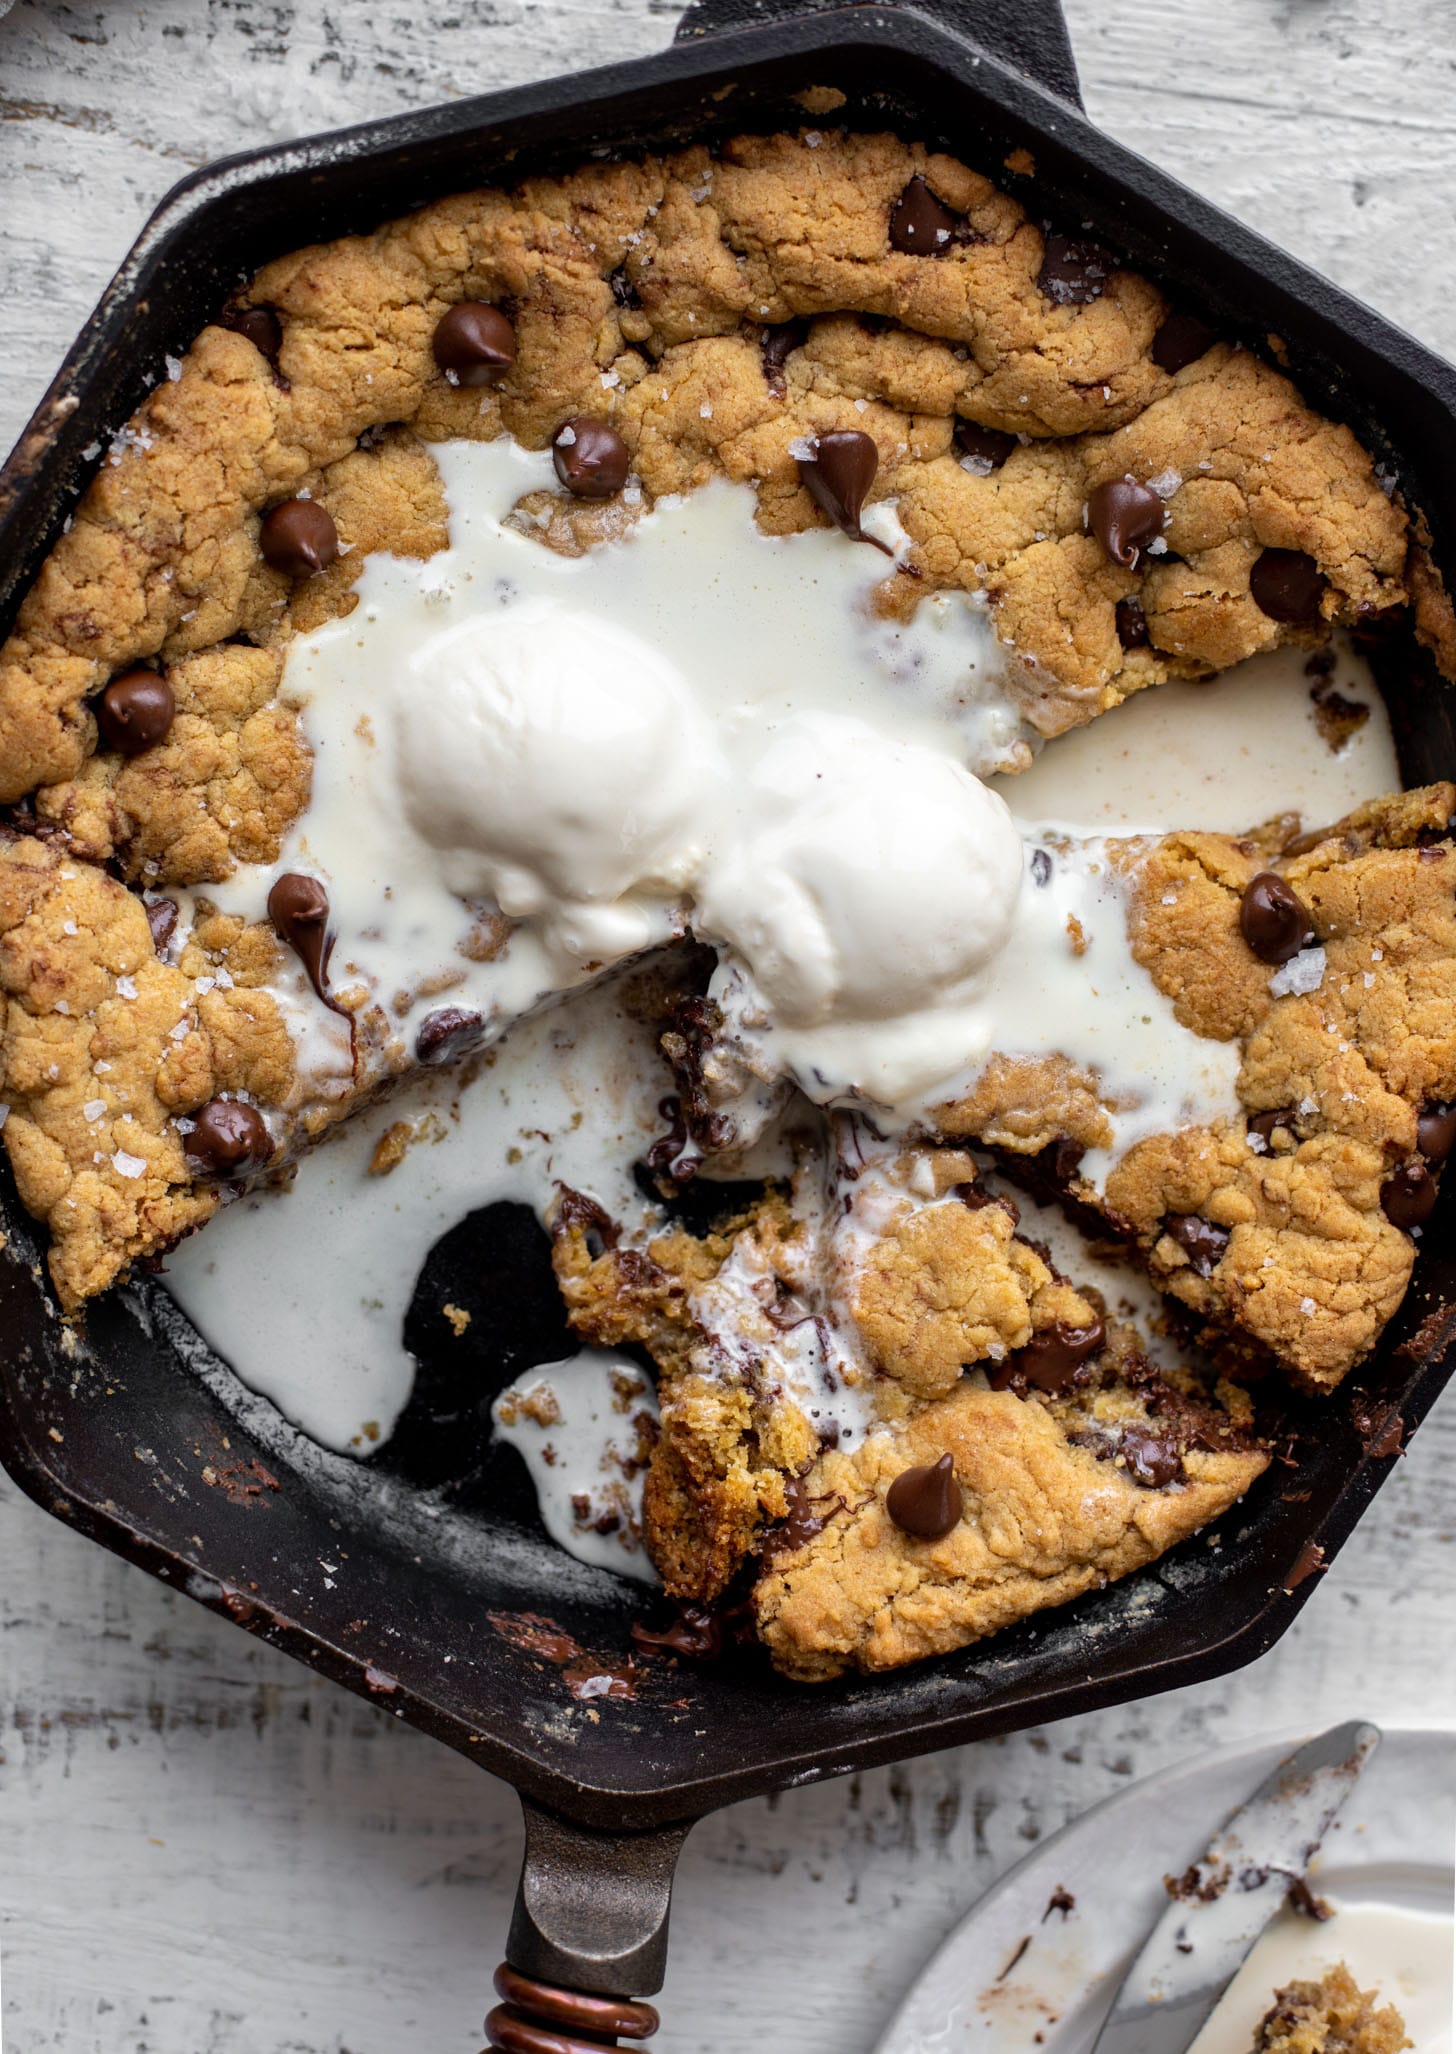 https://www.howsweeteats.com/wp-content/uploads/2021/02/chocolate-chip-skillet-cookie-21.jpg